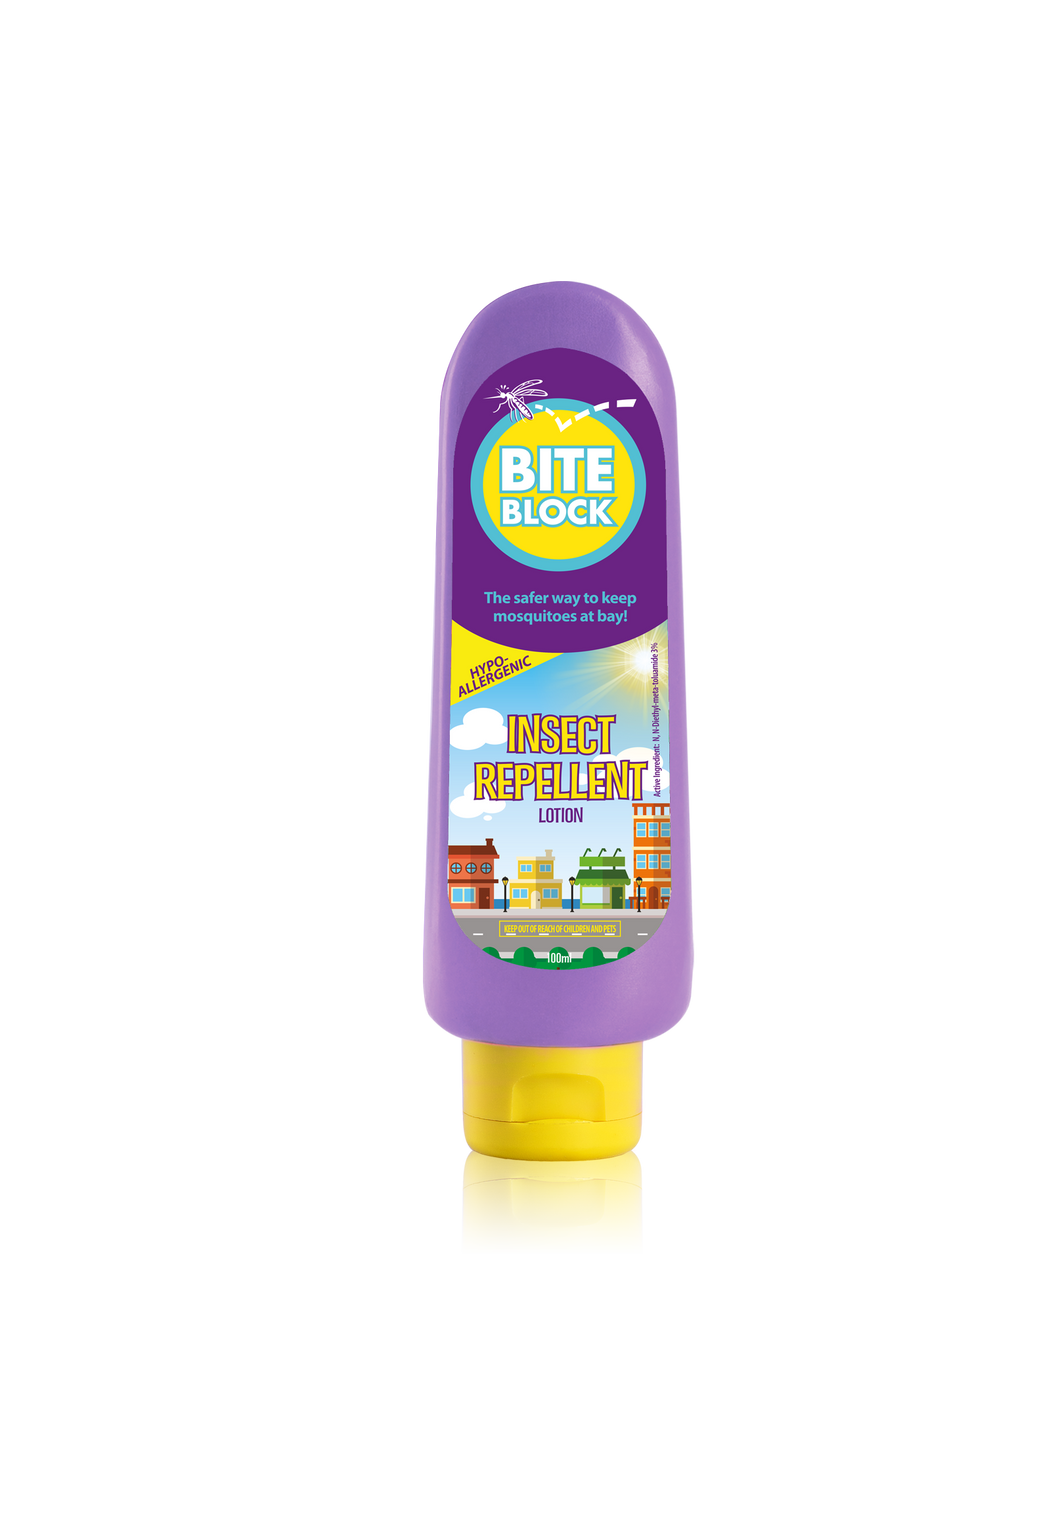 Bite Block - Daily Insect Repellent (4563302416418)